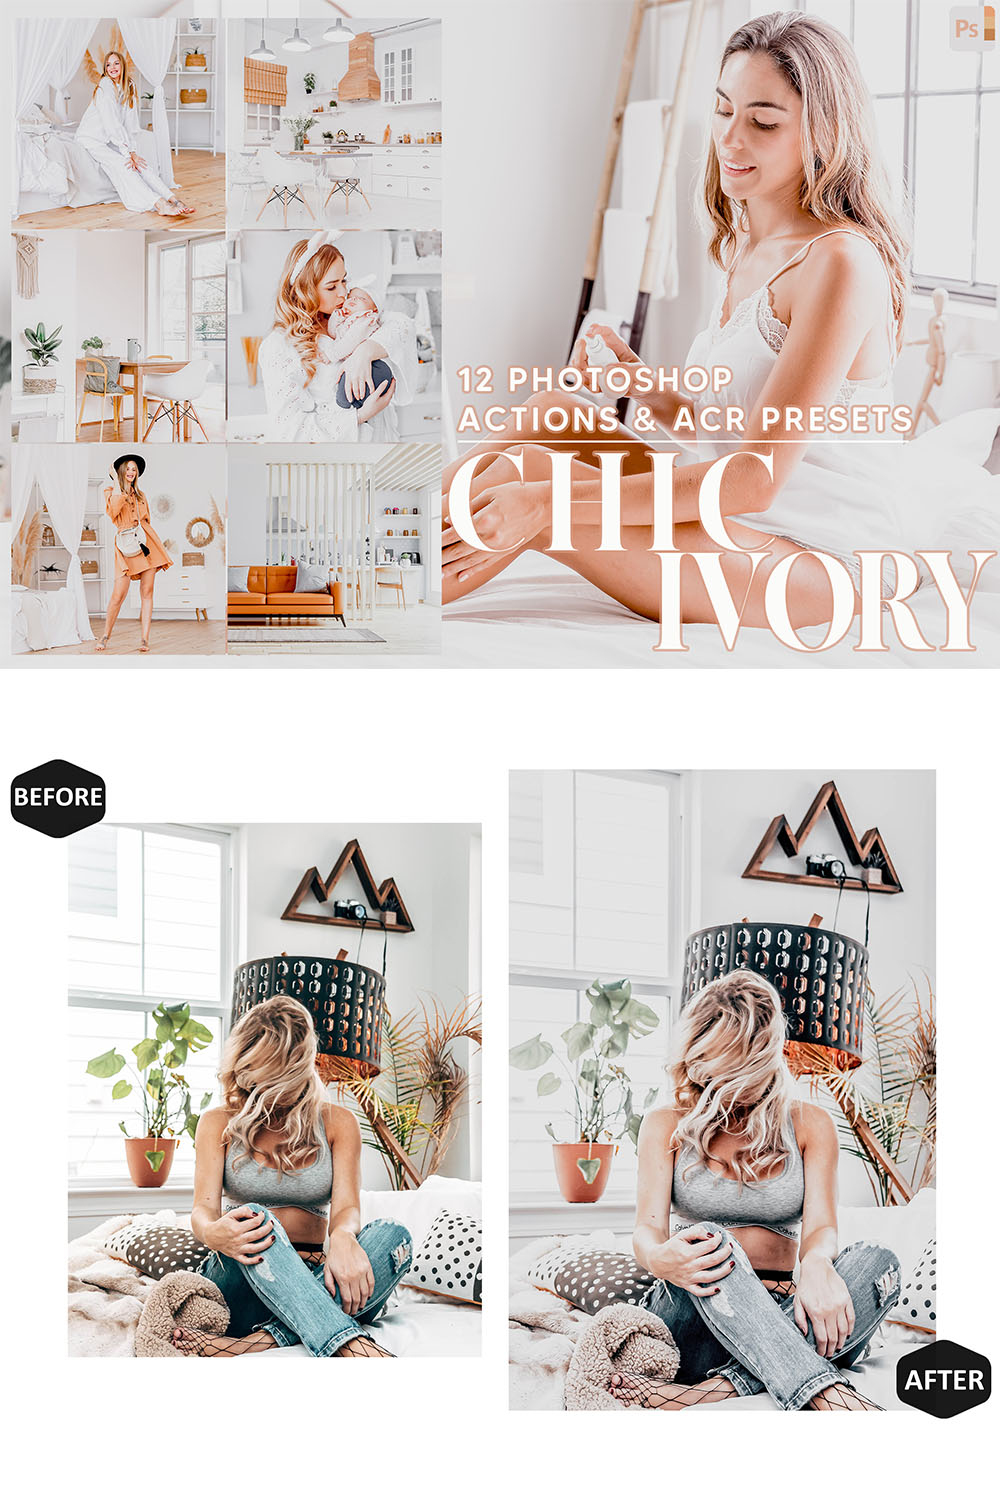 12 Photoshop Actions, Chic Ivory Ps Action, Bright ACR Preset, Bohemian Ps Filter, Atn Portrait And Lifestyle Theme For Instagram, Blogger pinterest preview image.